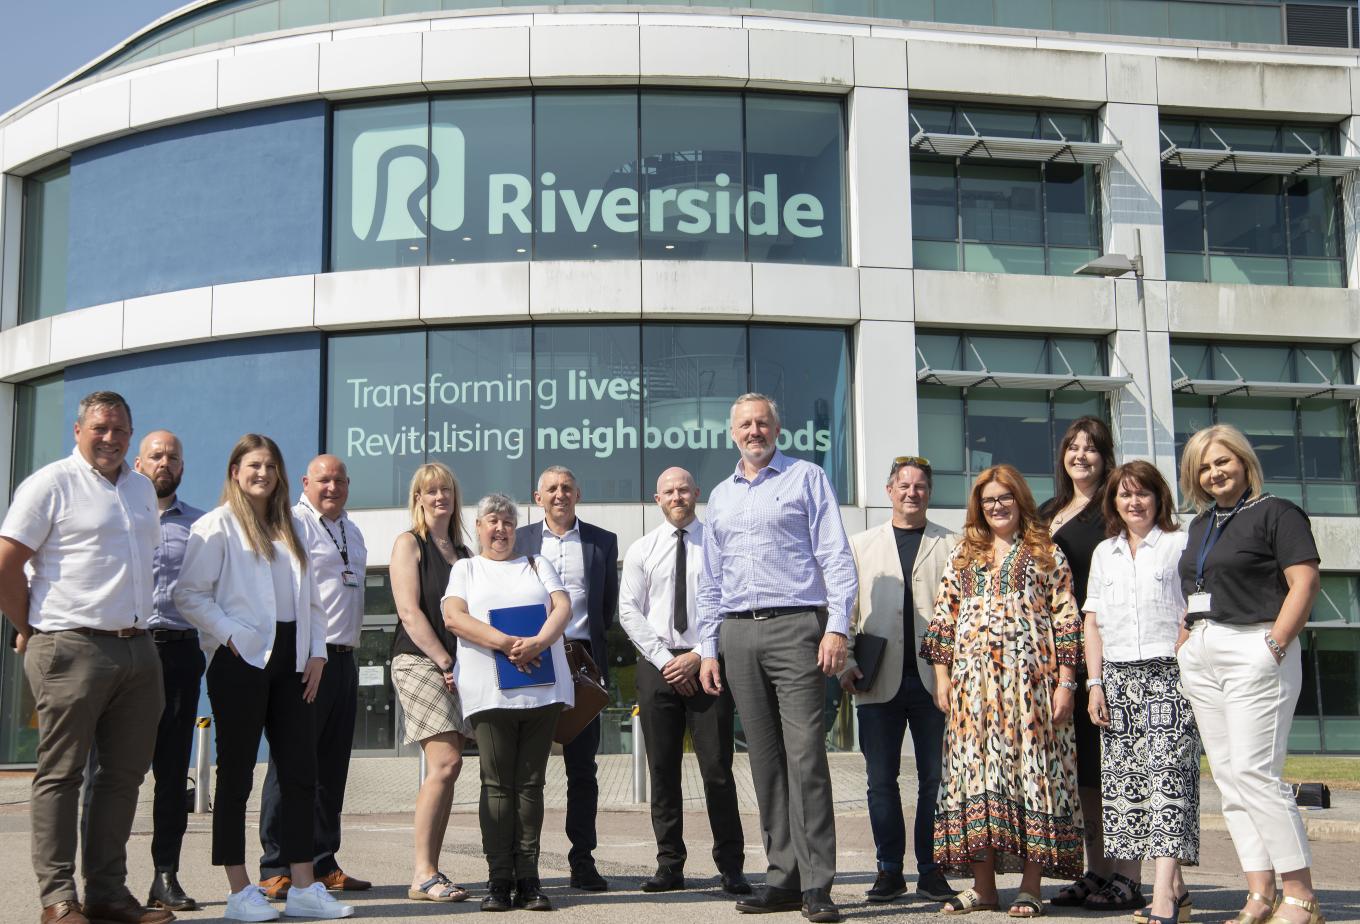 Equans and Riverside staff standing outside Riverside HQ